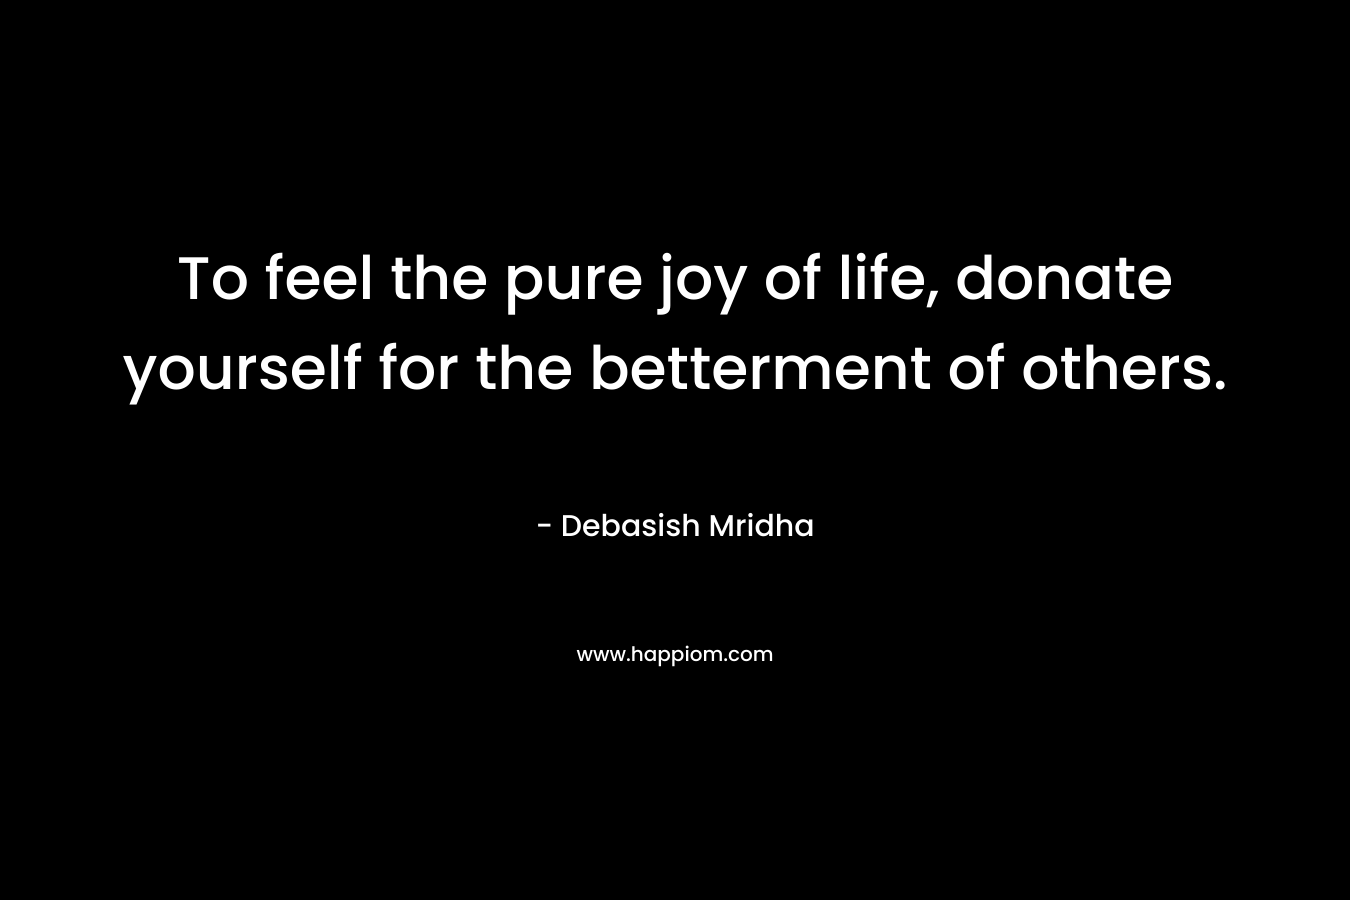 To feel the pure joy of life, donate yourself for the betterment of others.